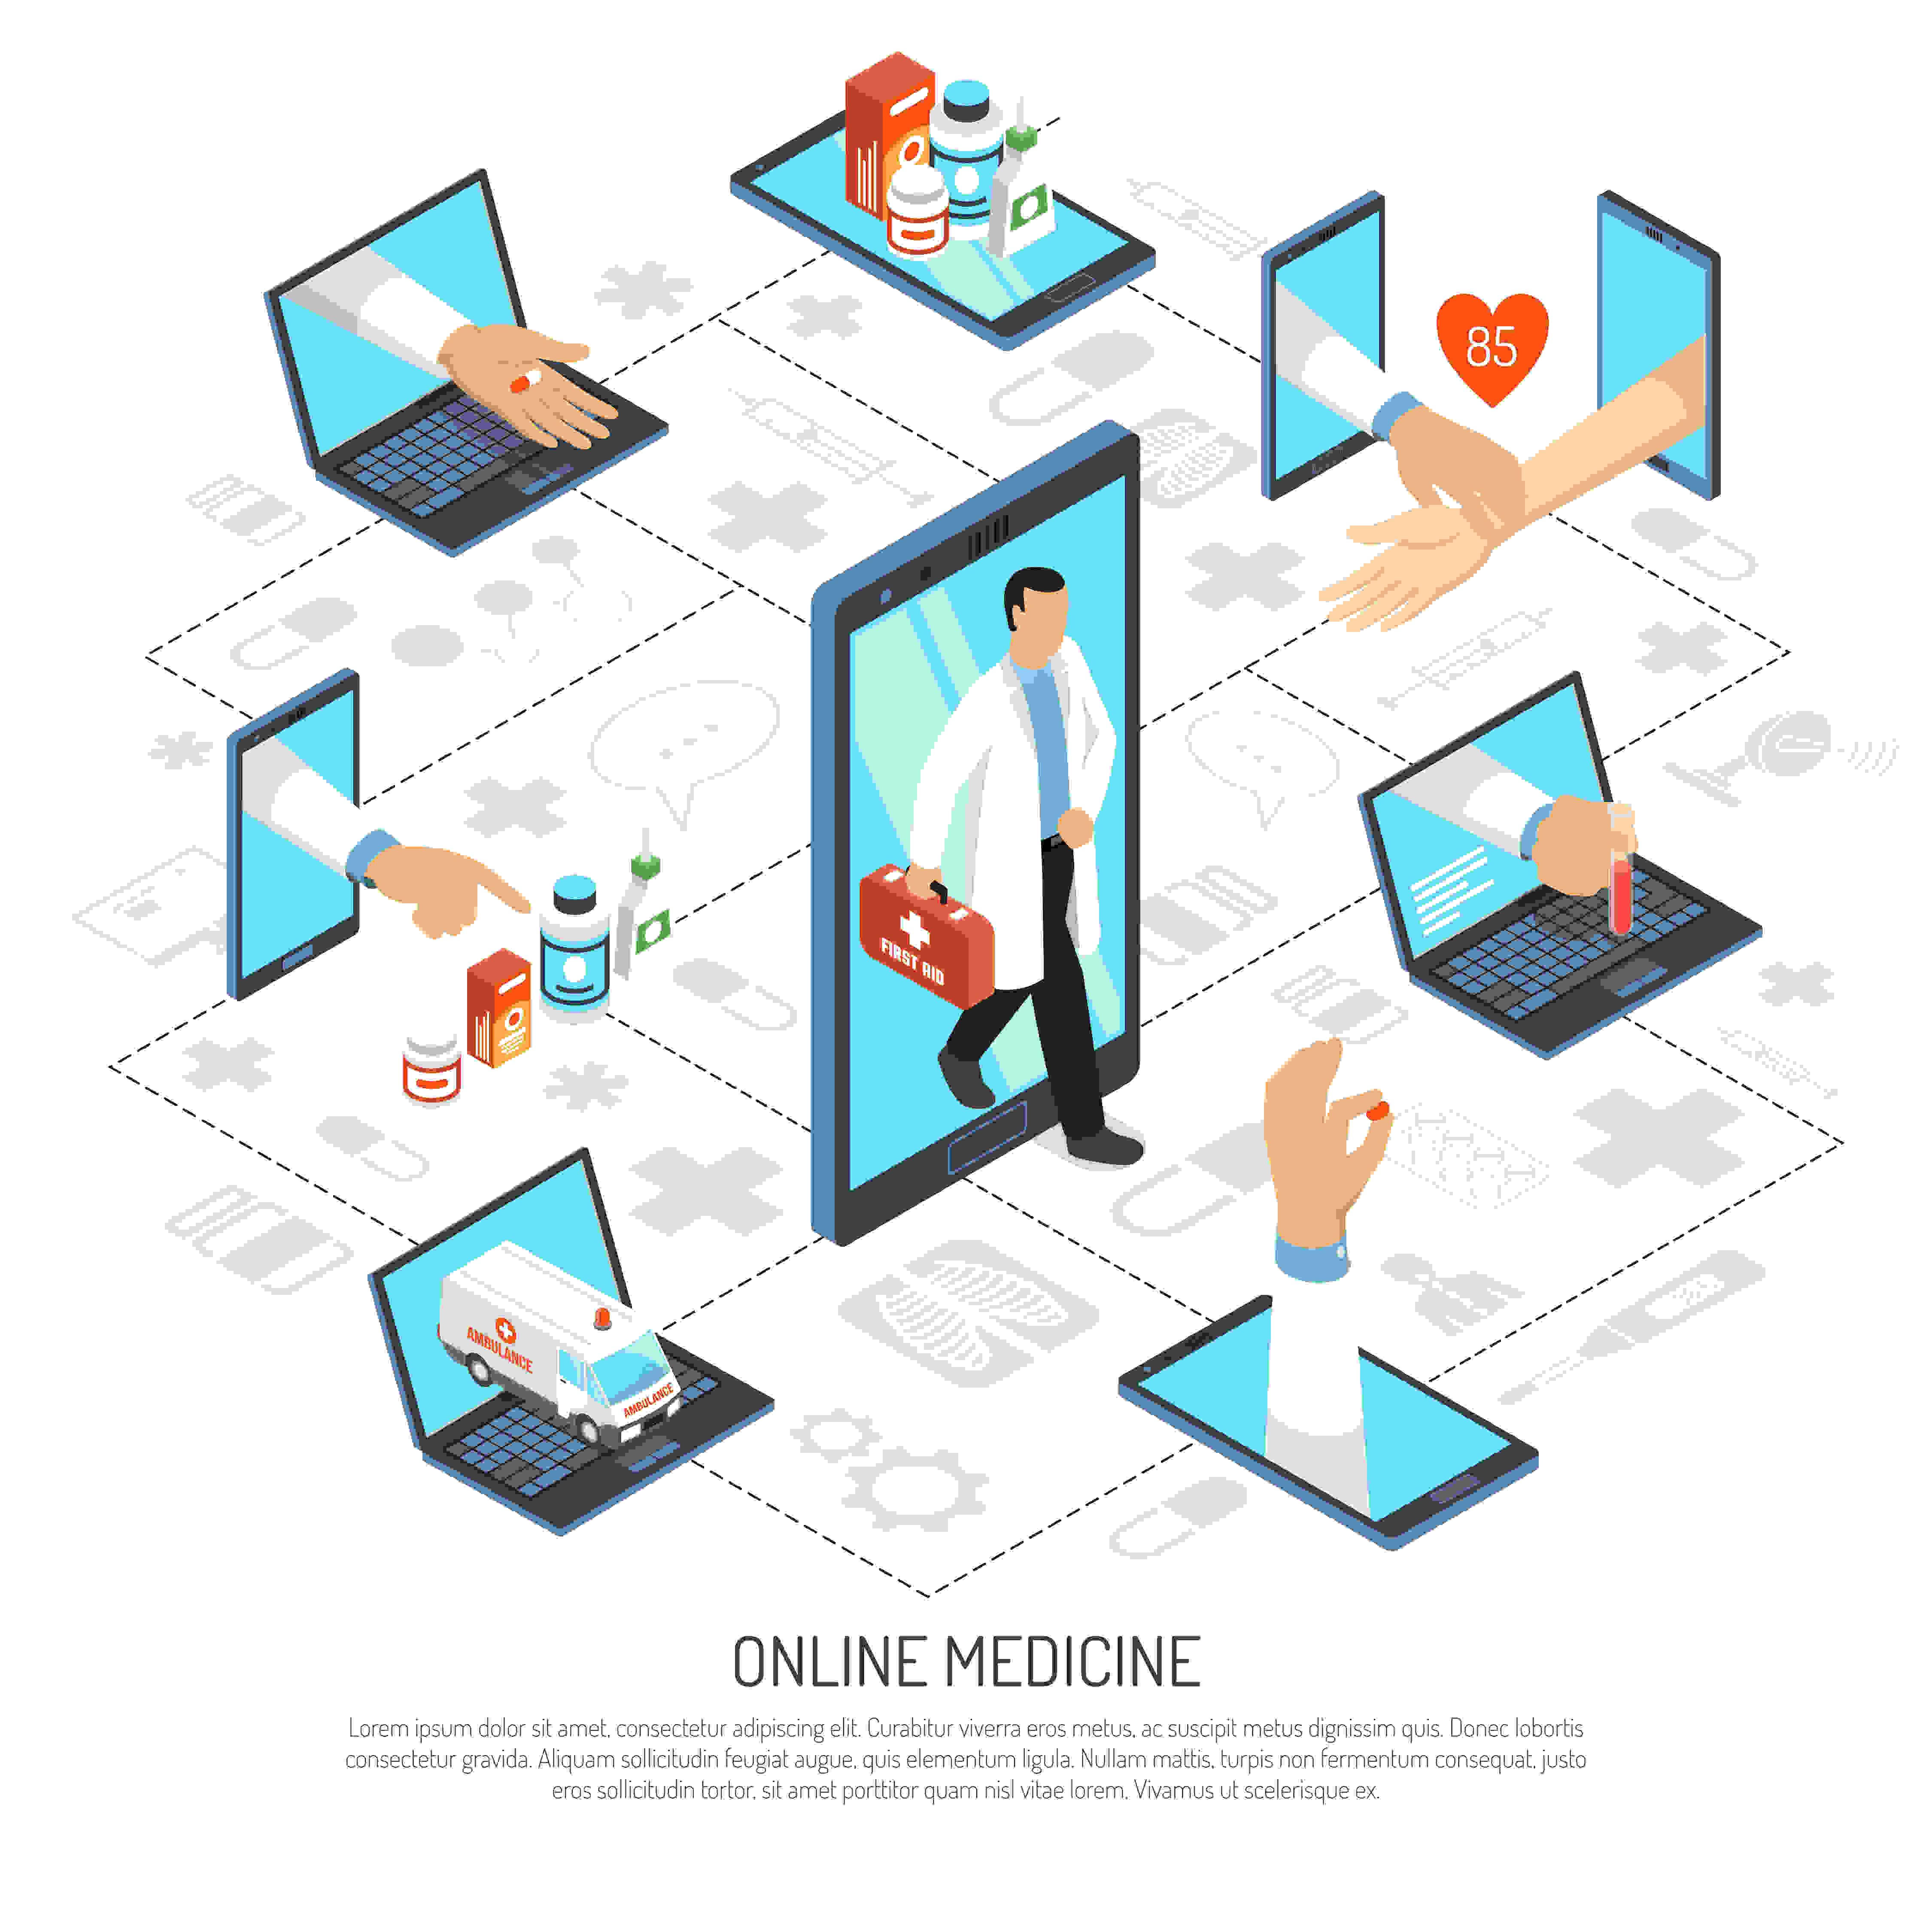 When Will Telemedicine Apps Become the Standard of Care?